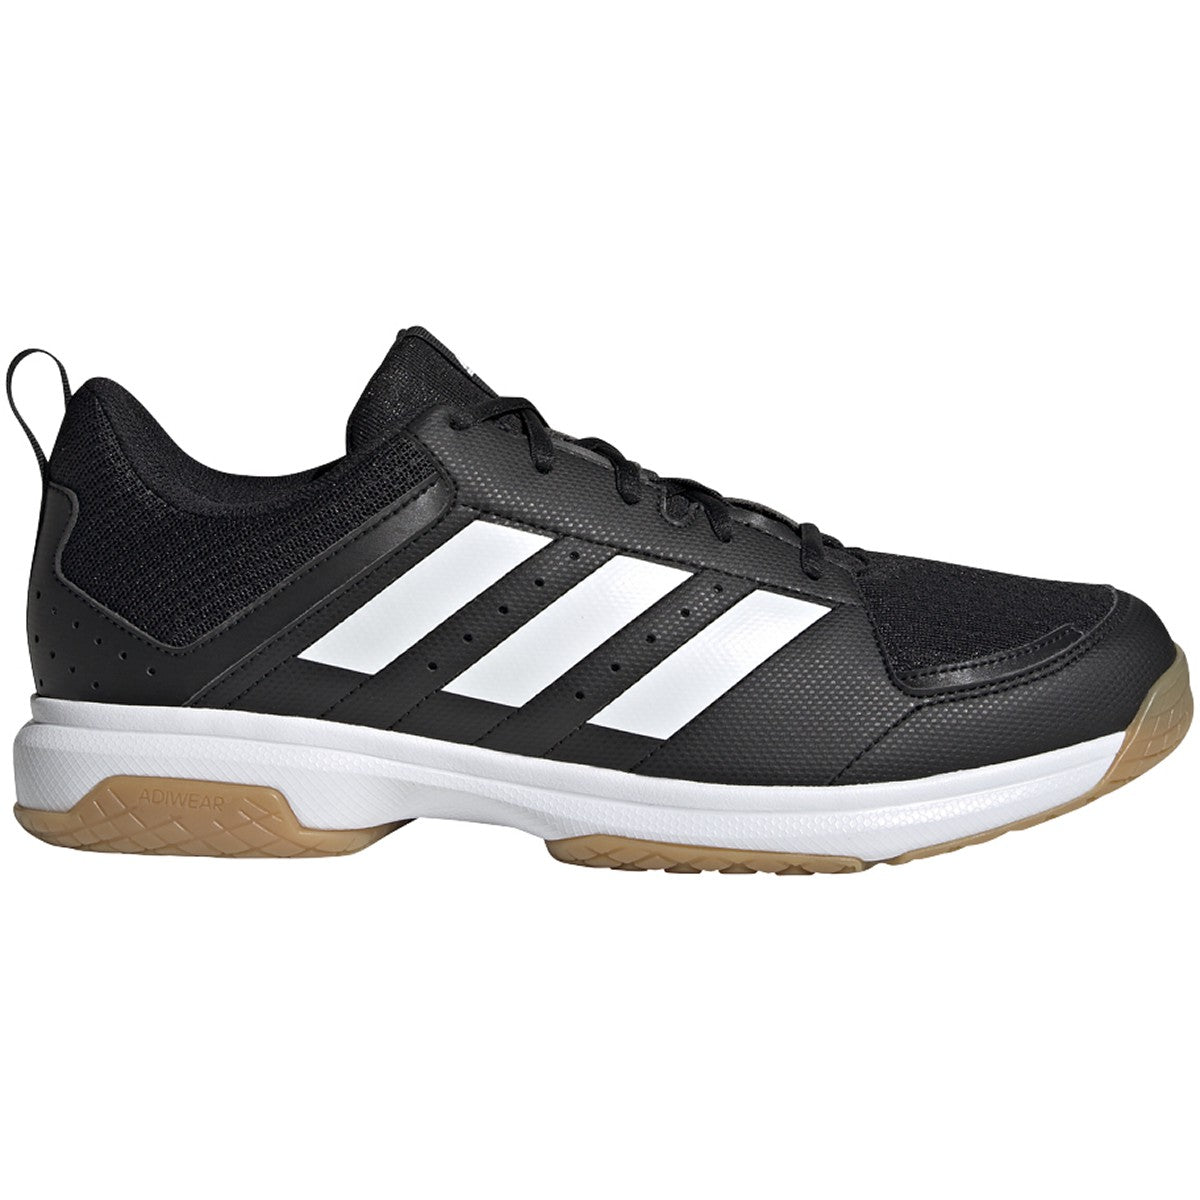 Outfitters 7 Shoes – Ligra League Mens Indoor adidas